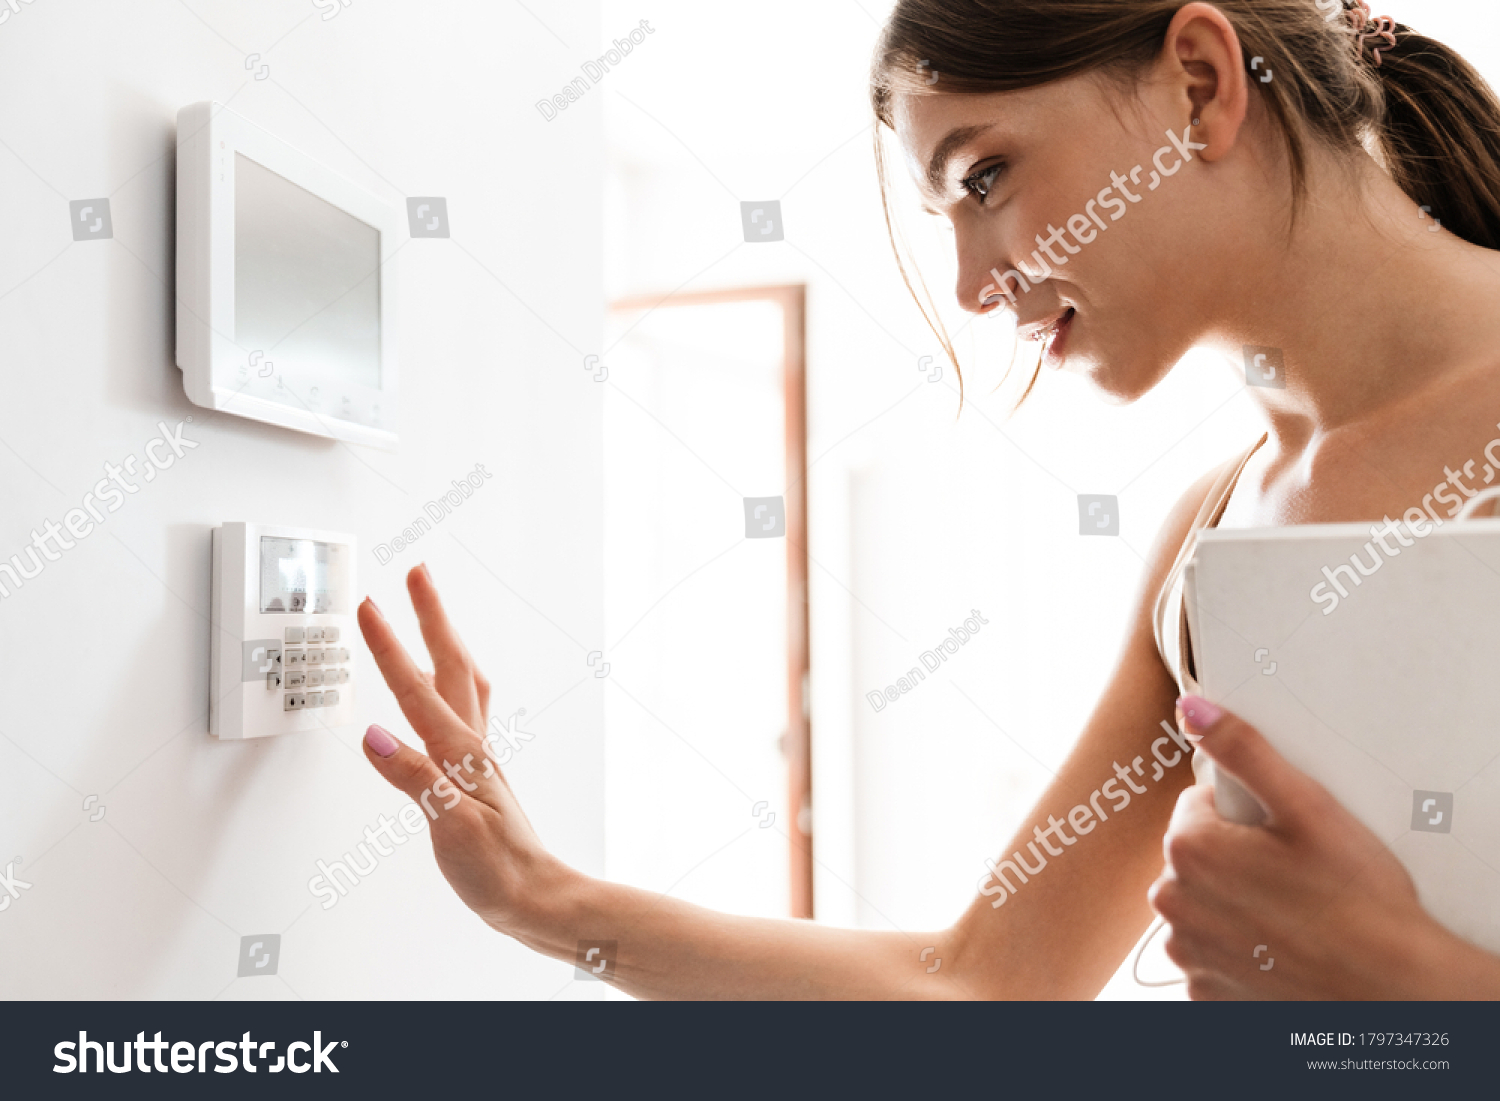 Young woman entering code on keypad of home security alarm #1797347326